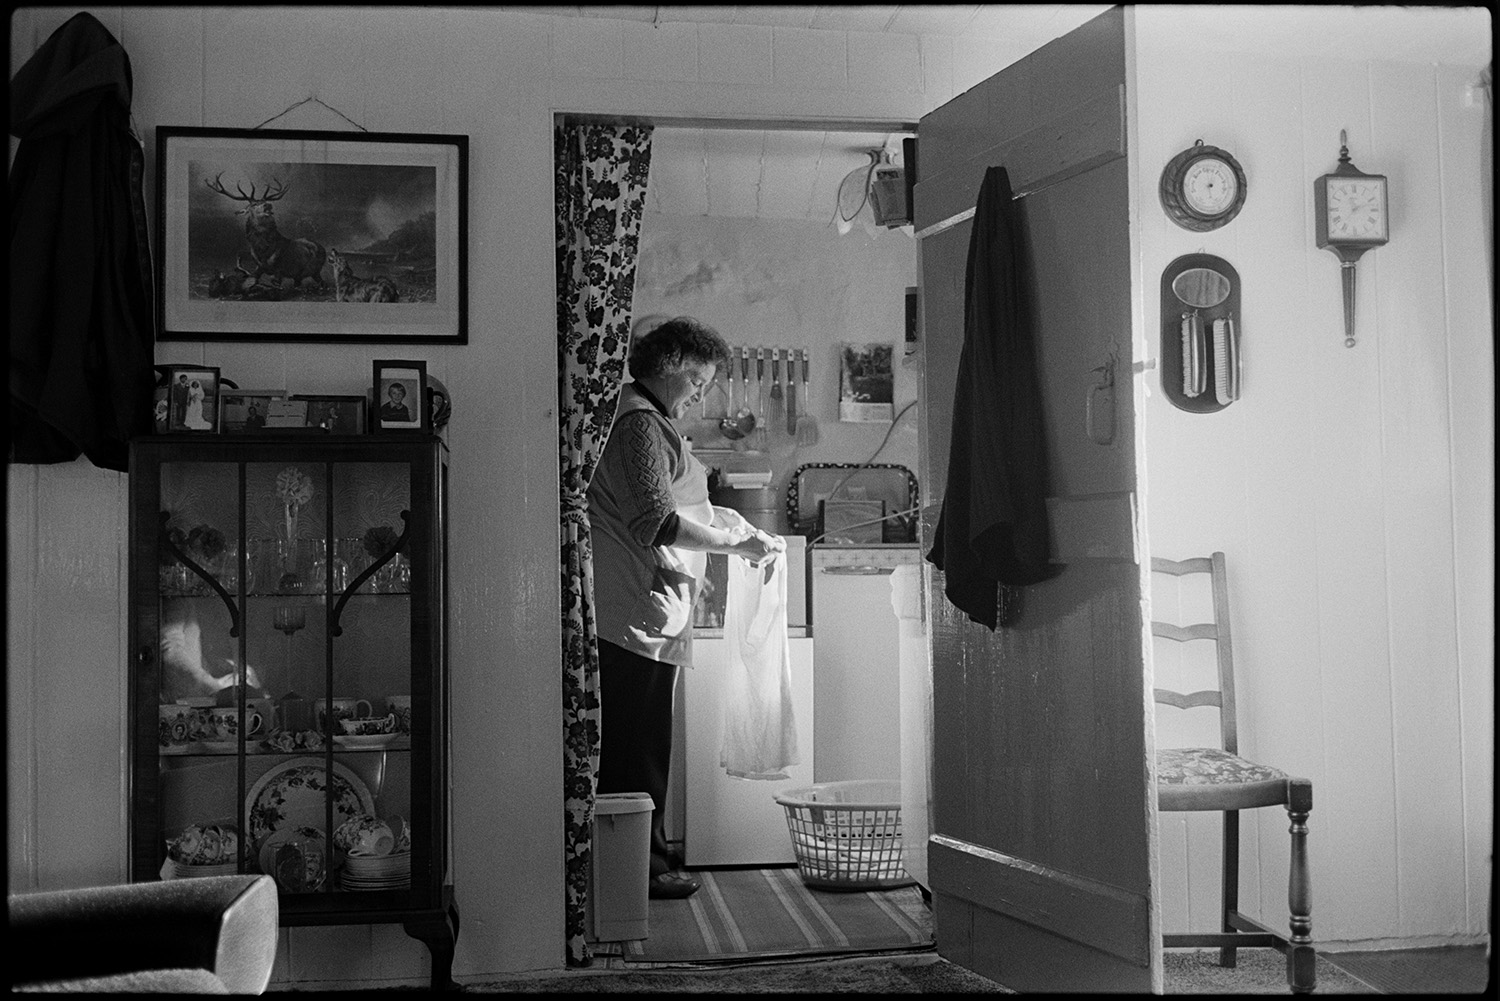 View through sitting room with woman doing washing, washing machine, glass cabinet, picture.
[View through the sitting room to the kitchen at Upcott, Dolton, of Mrs Piper doing the washing. A picture, barometer and clock hang on the wall; and a glass cabinet with china can be seen in the living room. A fridge, washing basket and cooking utensils are visible in the kitchen.]